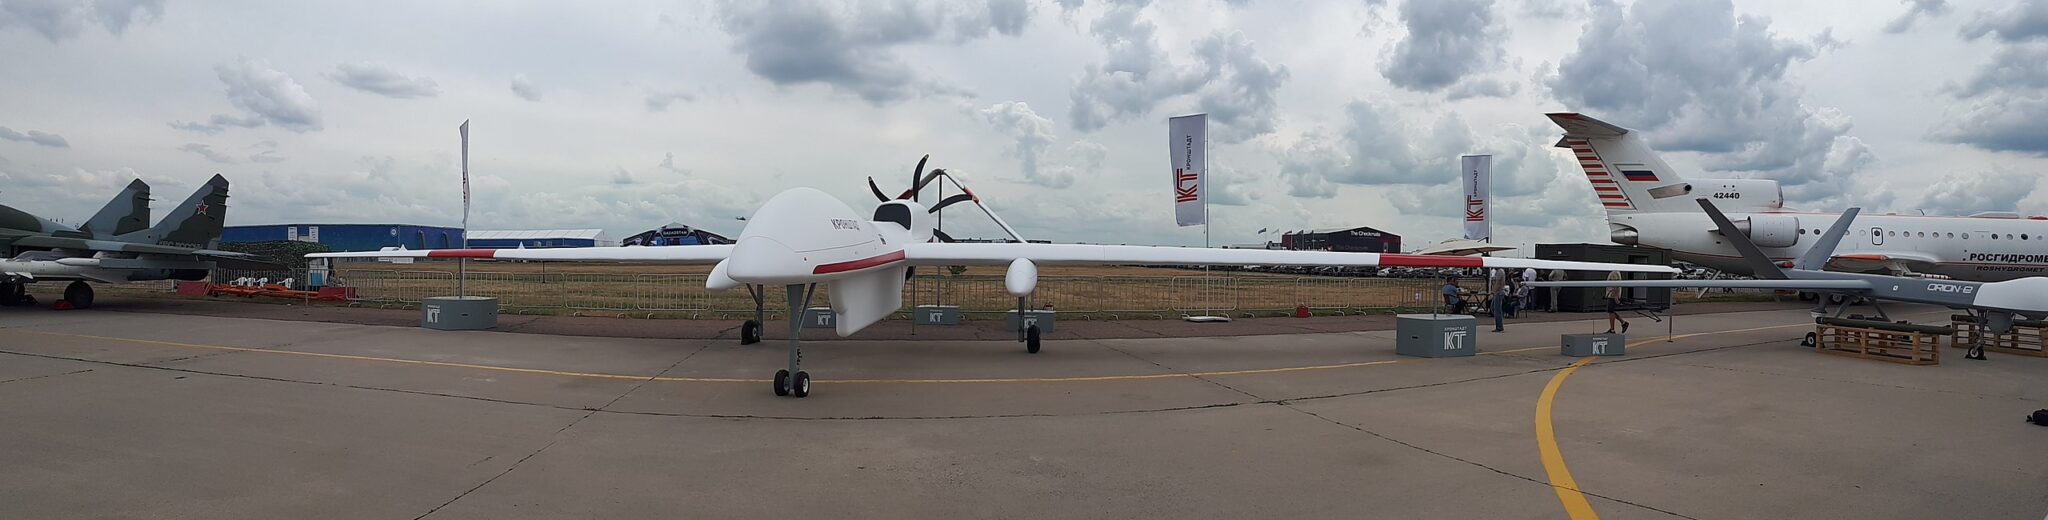 Gelios RLD drone on MAKS 2021 airshow scaled